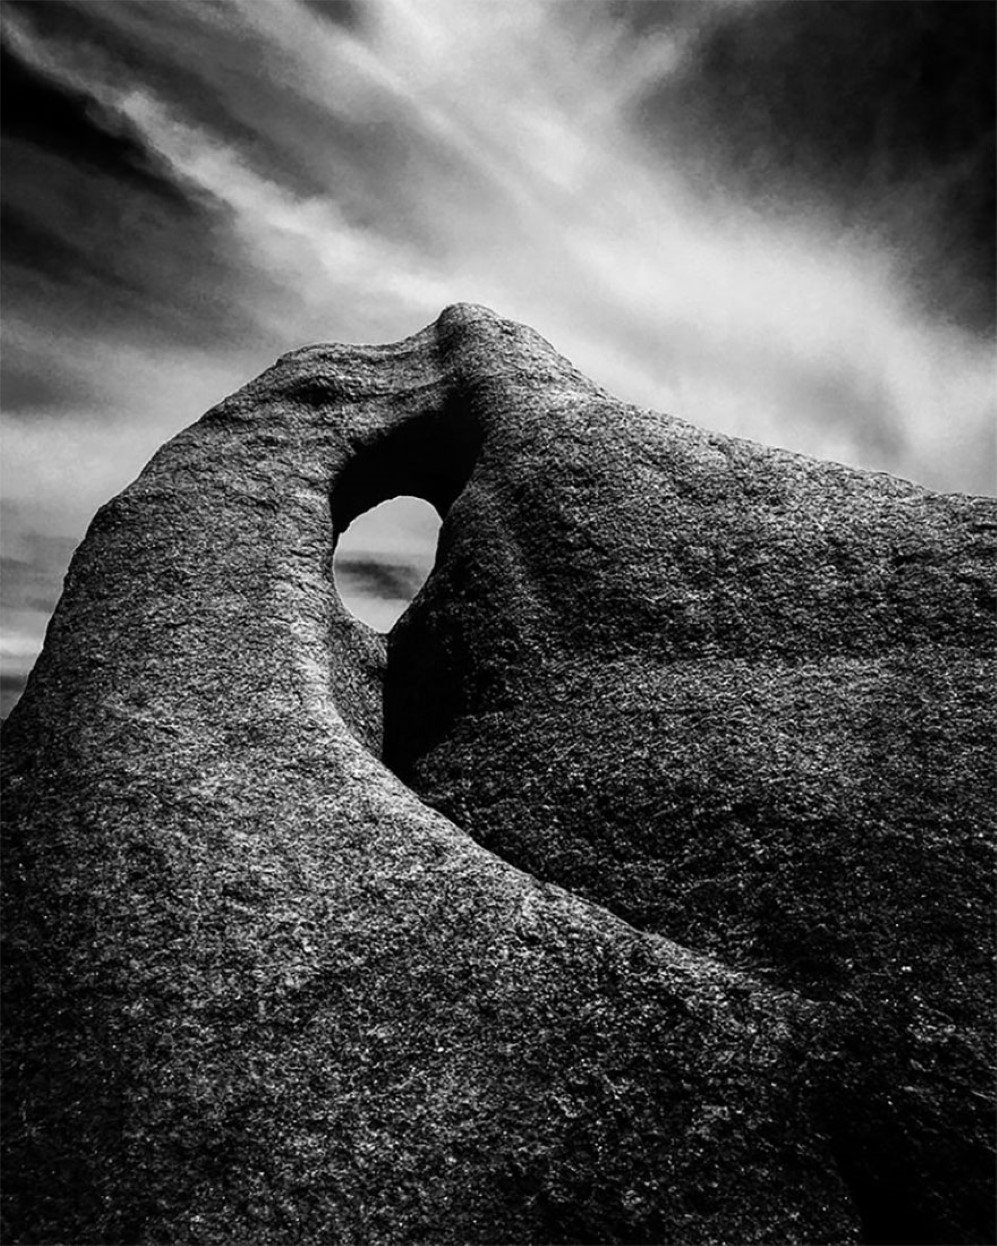 I captured this image in the Margaret River region of Western Australia.  It’s my second home, and one of the most spectacular places on earth.  This was taken on the coast at Wyadup Rocks, and is called Singing Rock.  I was swimming there with family when I was drawn to it by the sound of it’s song as the wind whistled through it, and just had to capture this image.